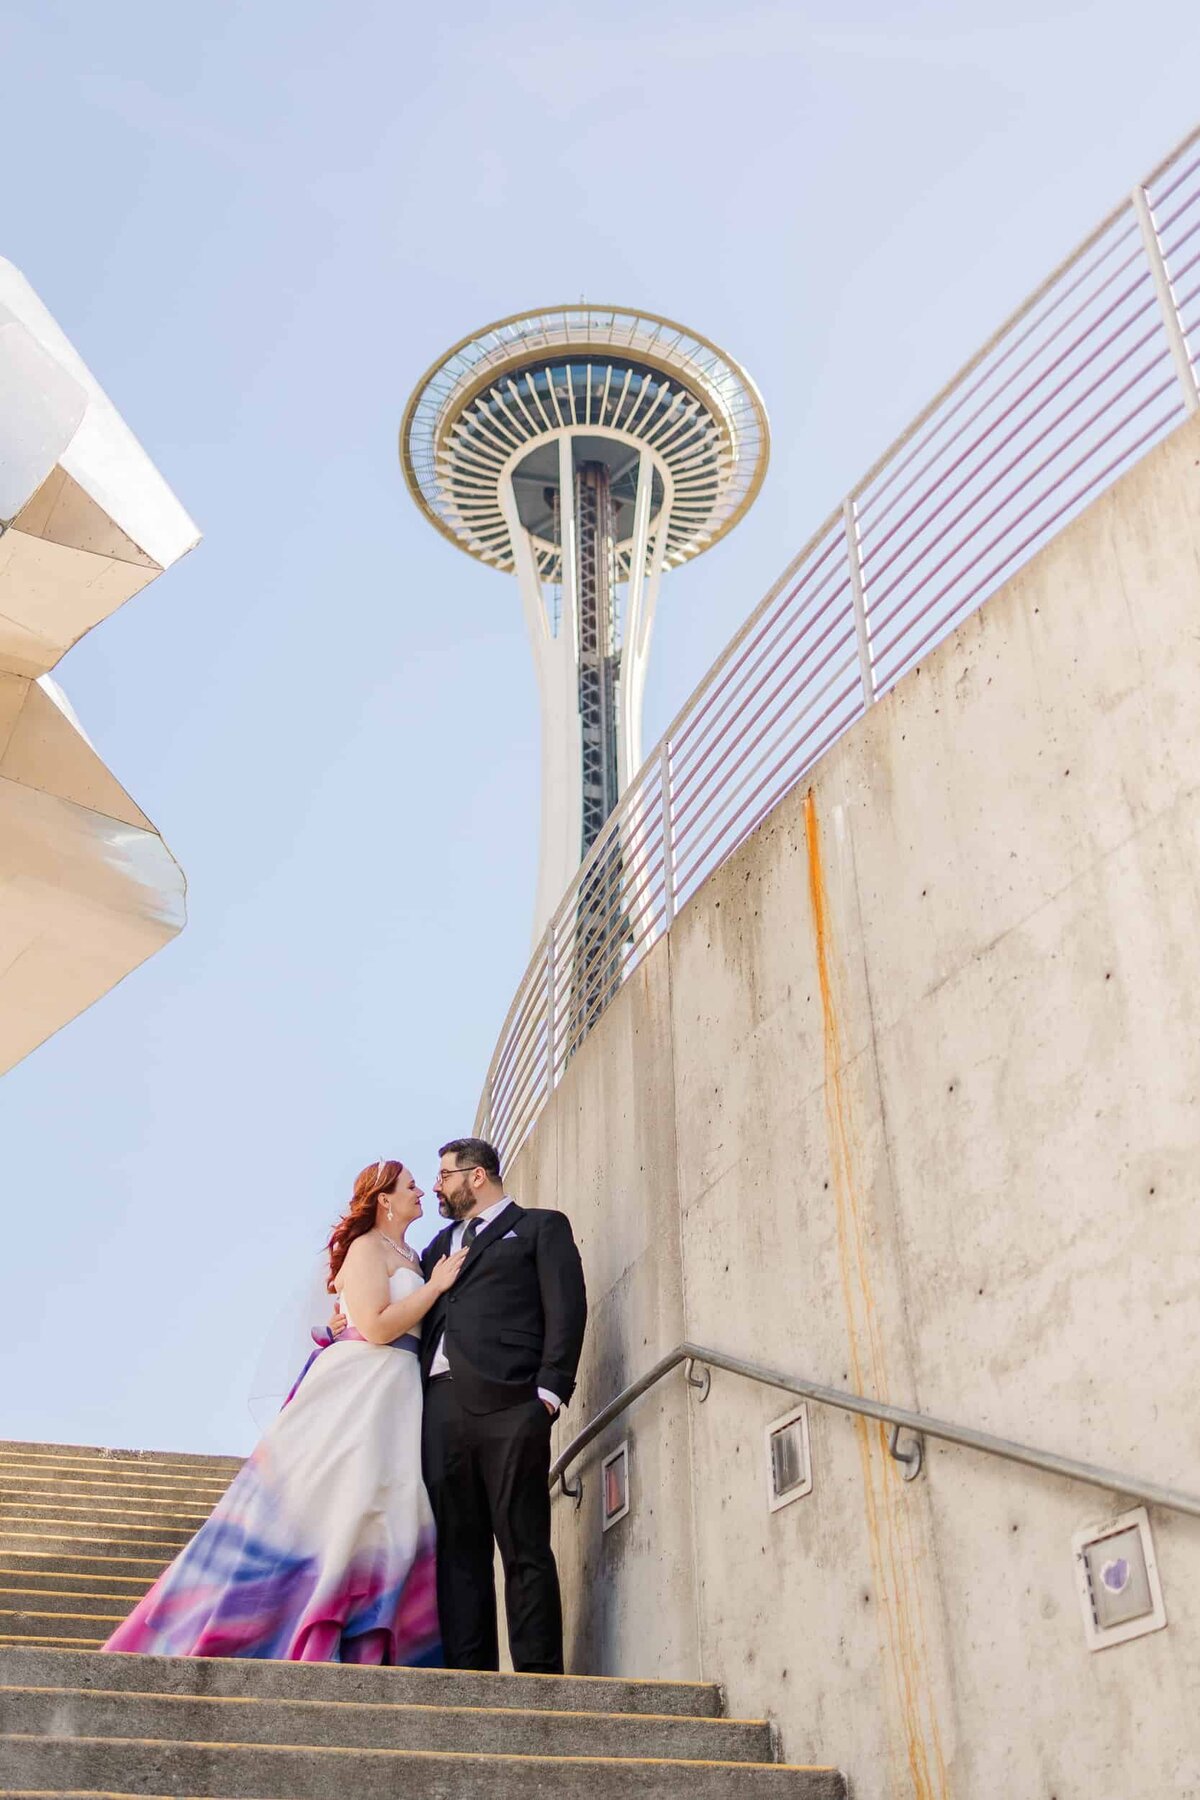 Couple in warm embrace, with bride, wearing non-traditional wedding dress with many colors, in front of Seattle's space needle